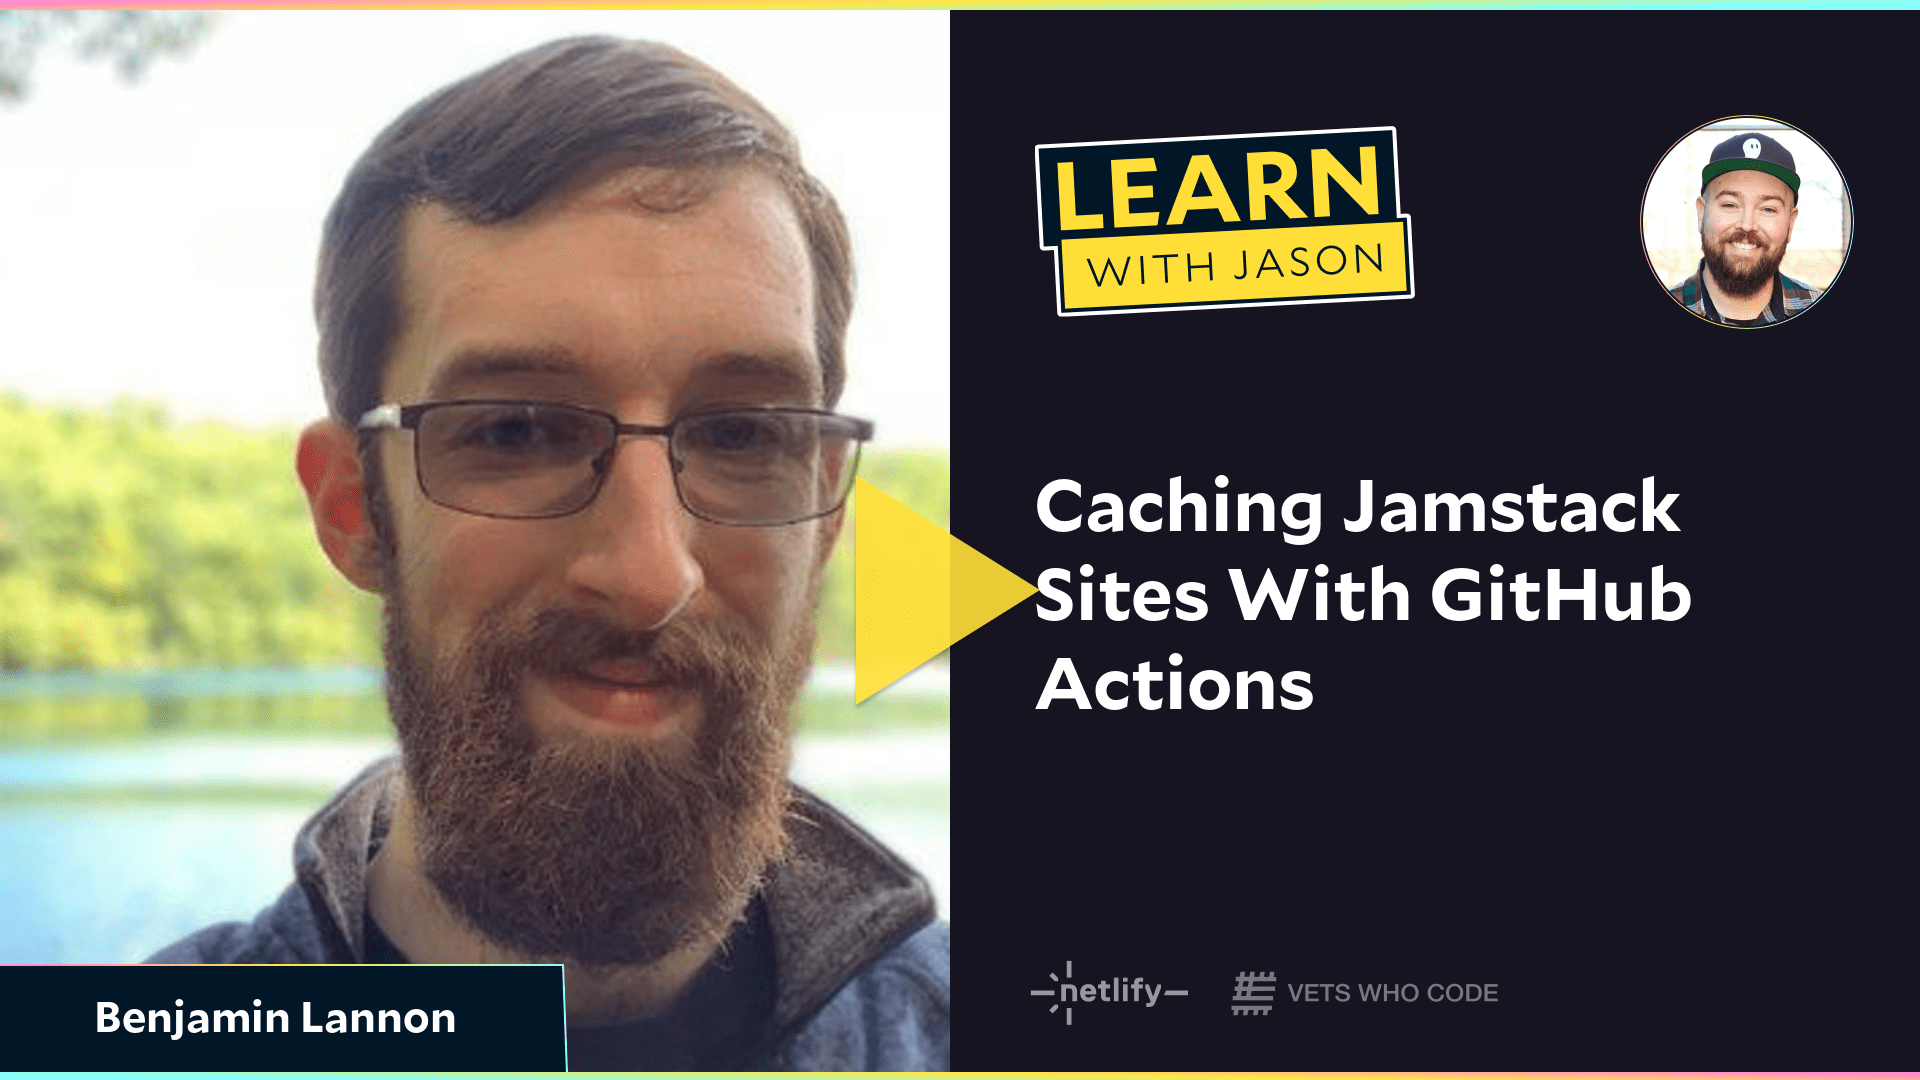 Caching Jamstack Sites With GitHub Actions (with Benjamin Lannon)